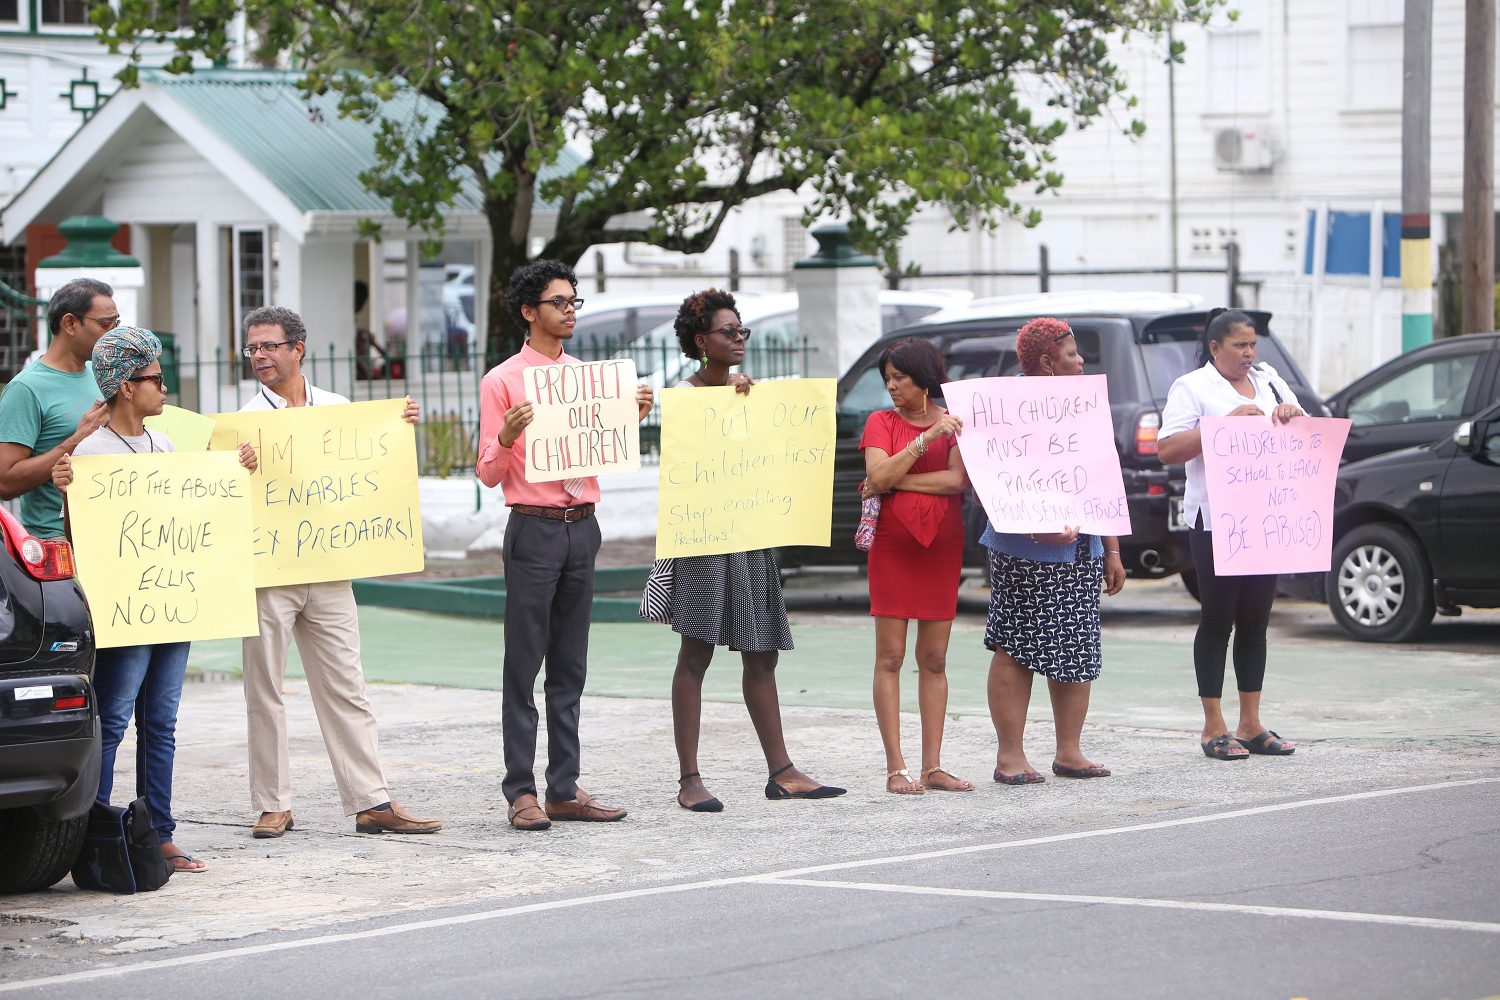 Protesters gathered in front of the Ministry of Education yesterday. (Photo by Keno George)